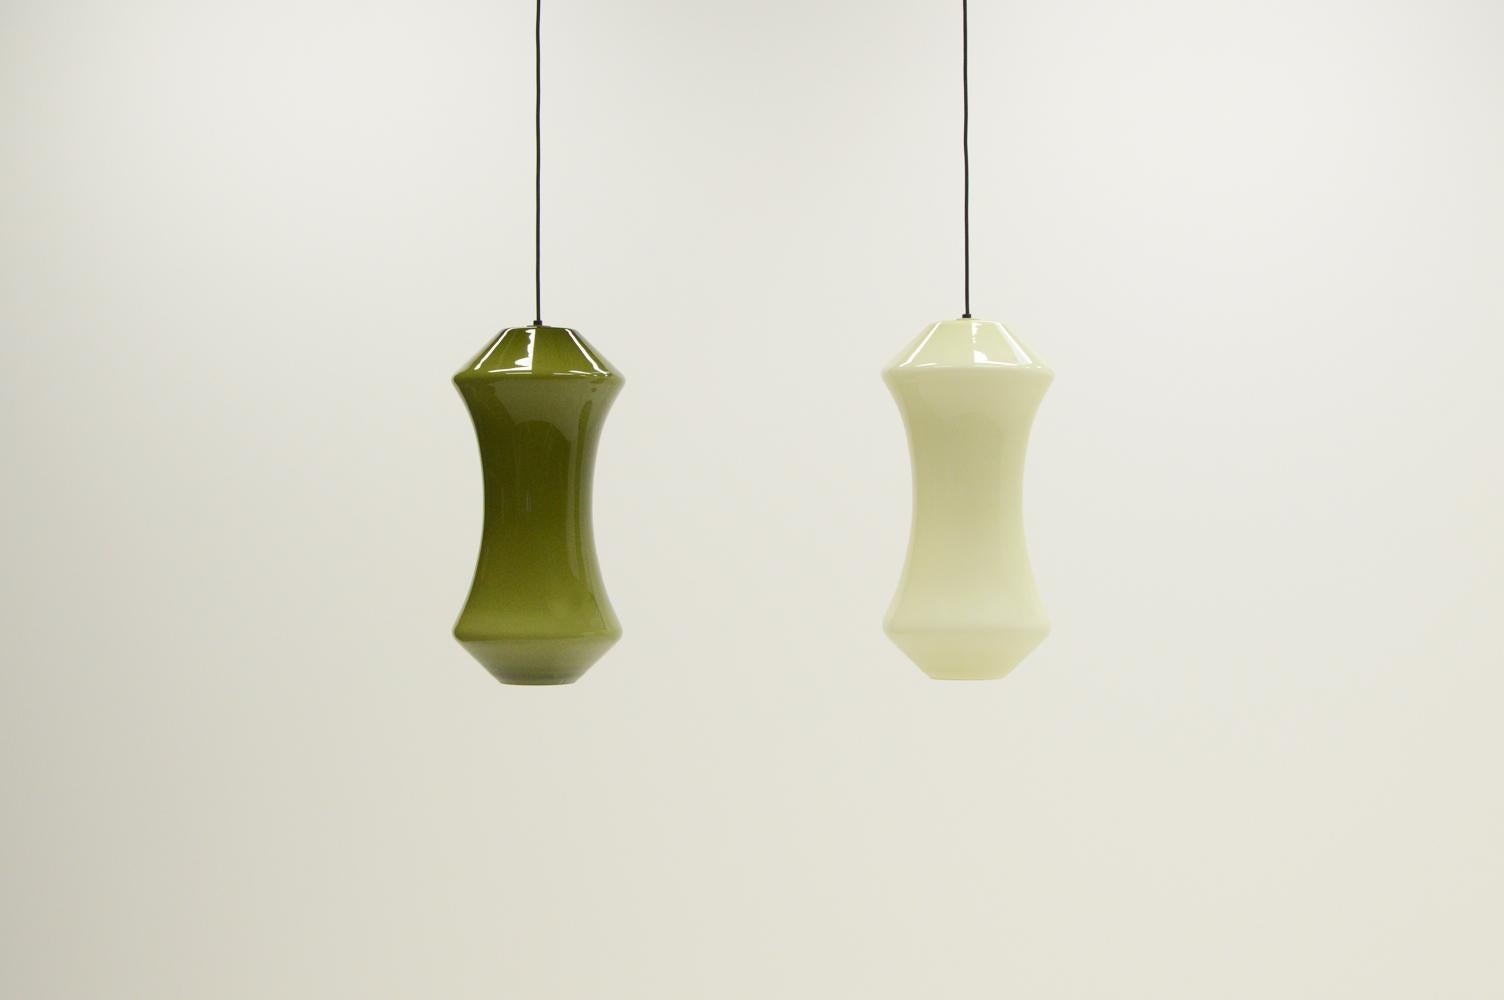 Set of 2 glass pendants by Vistosi, 1970s Italy. Large pendants in green and off white murano glass. The inside of the lamp has white glass that forms a beautiful base for the color and helps with the reflection inside. Each hold an E27 bulb.